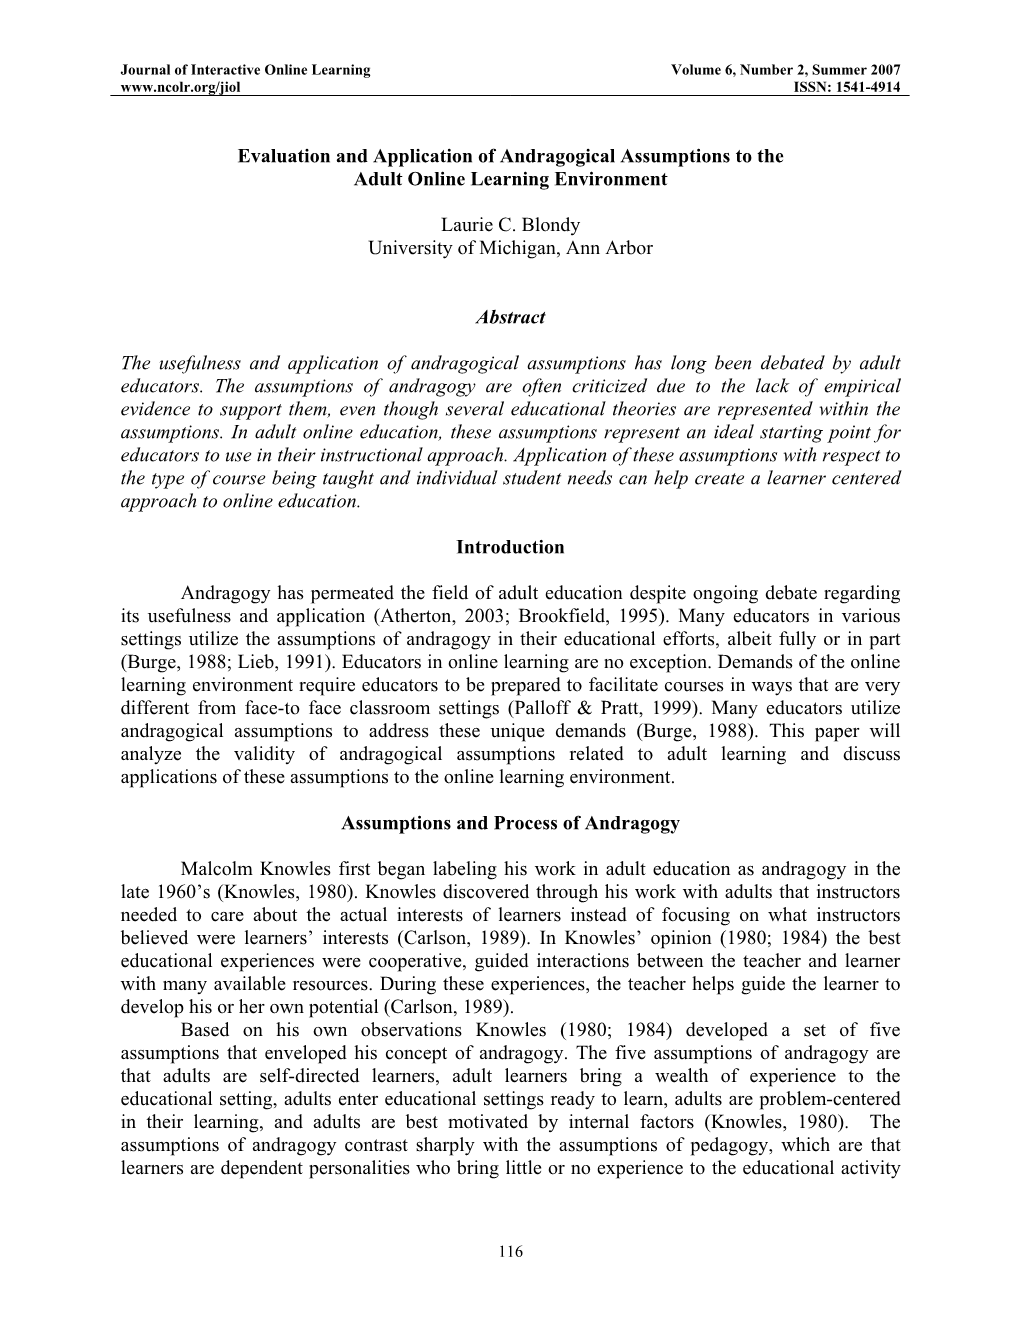 Evaluation and Application of Andragogical Assumptions to the Adult Online Learning Environment